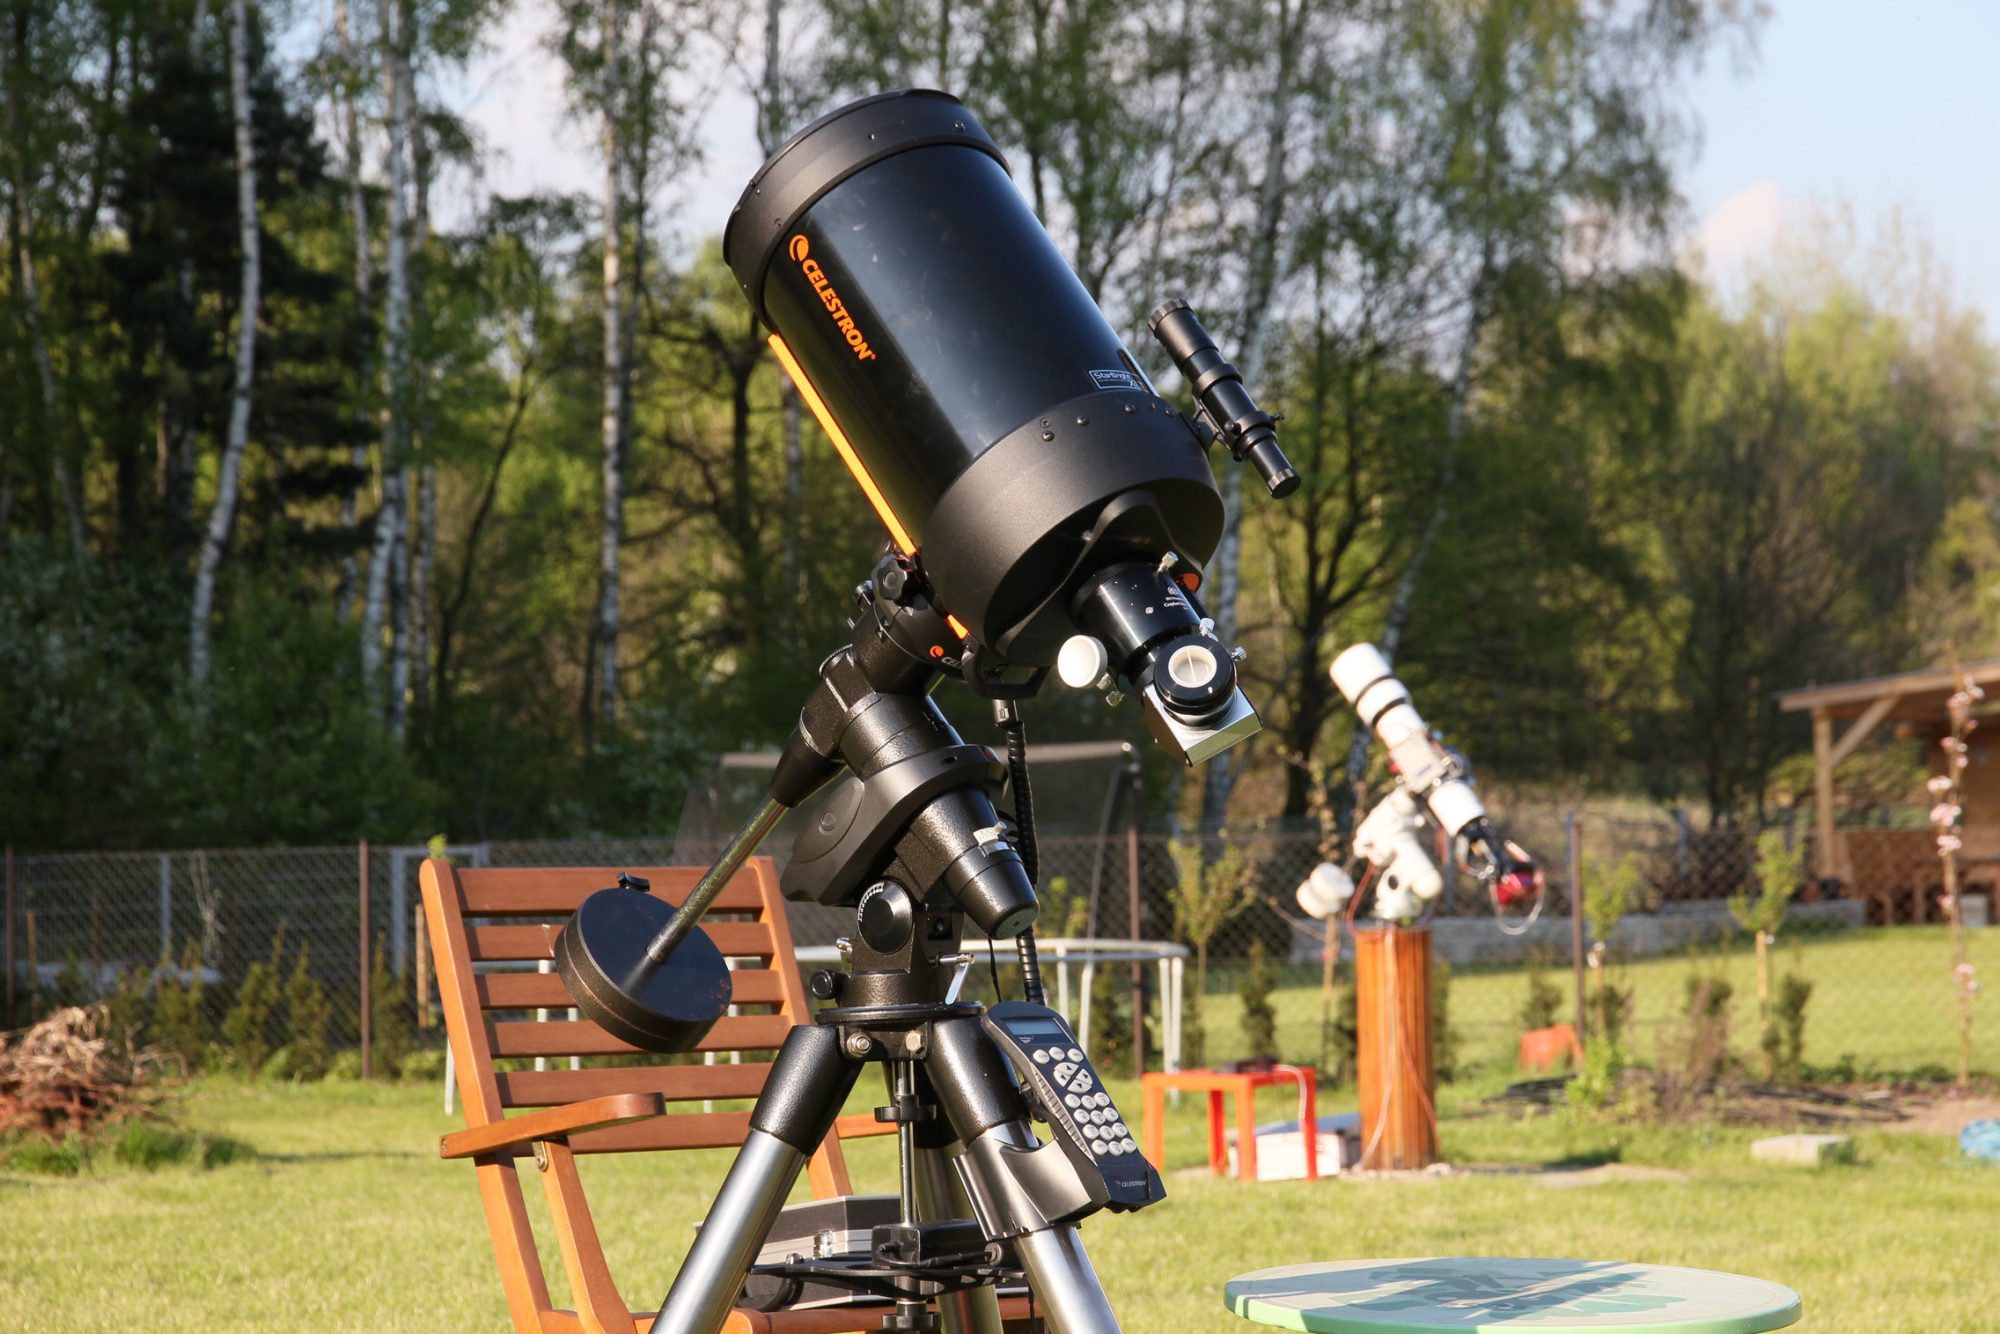 200mm SCT telescope and 130mm refractor on GoTo mounts